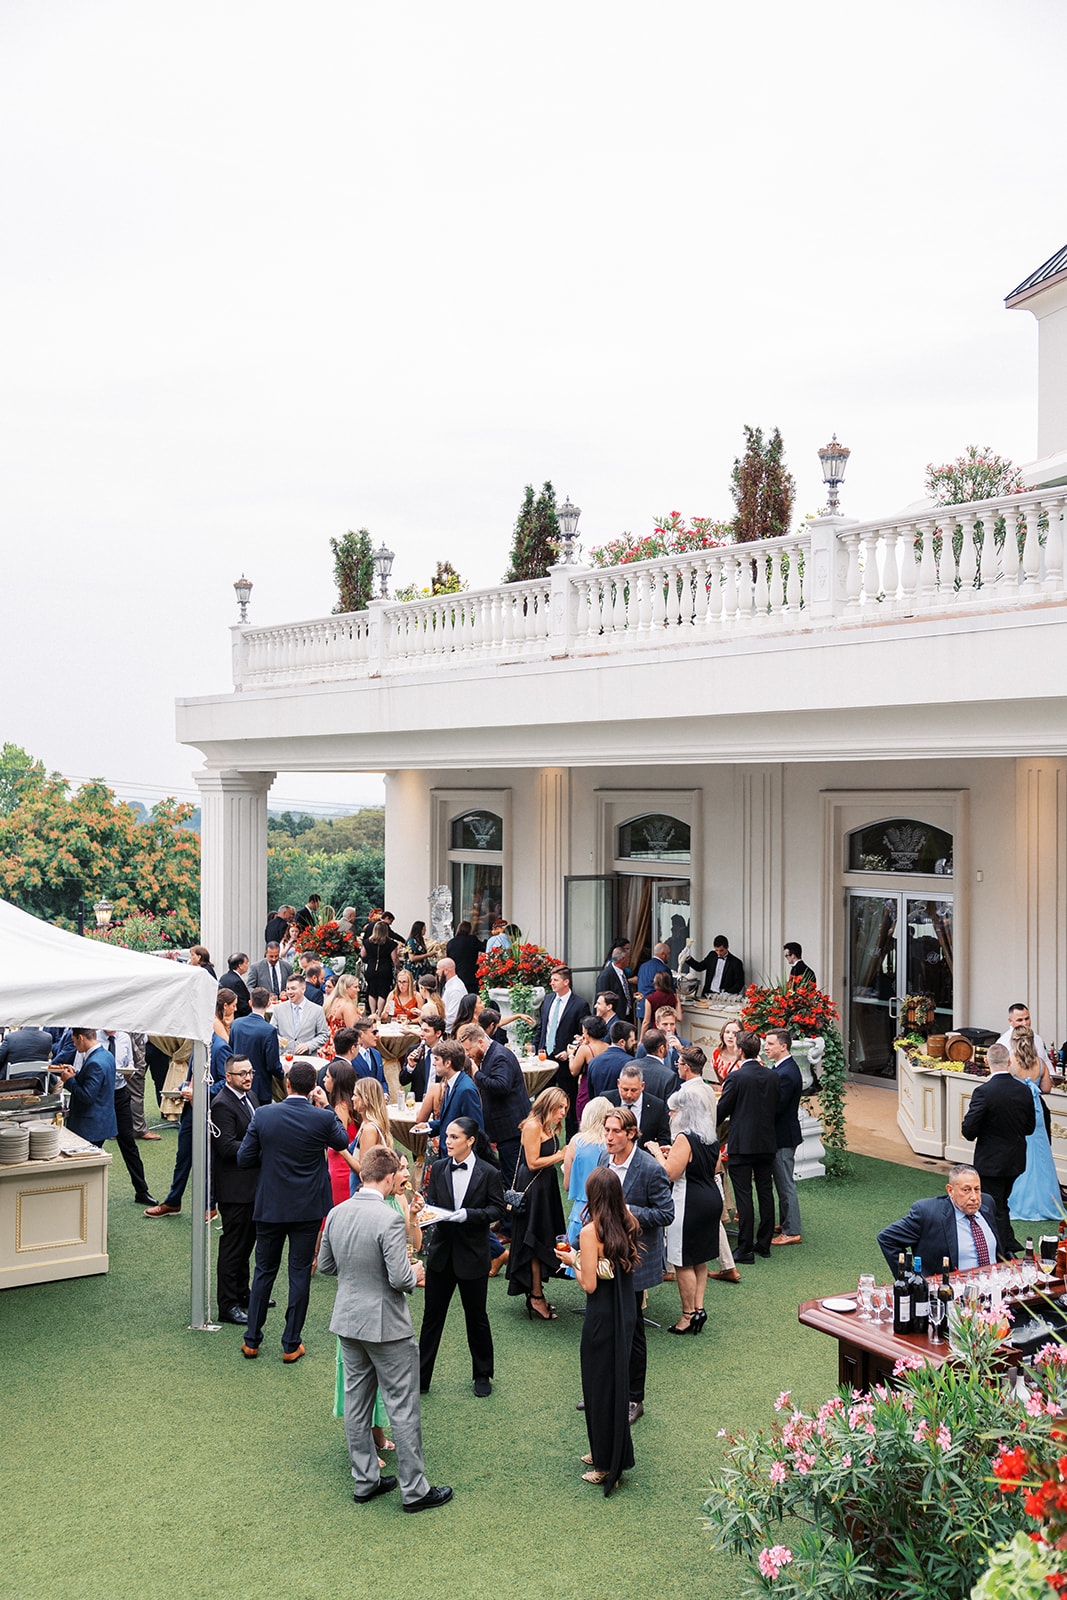 A wedding cocktail hour taking place with many guests at a Villa Barone Hilltop Manor wedding